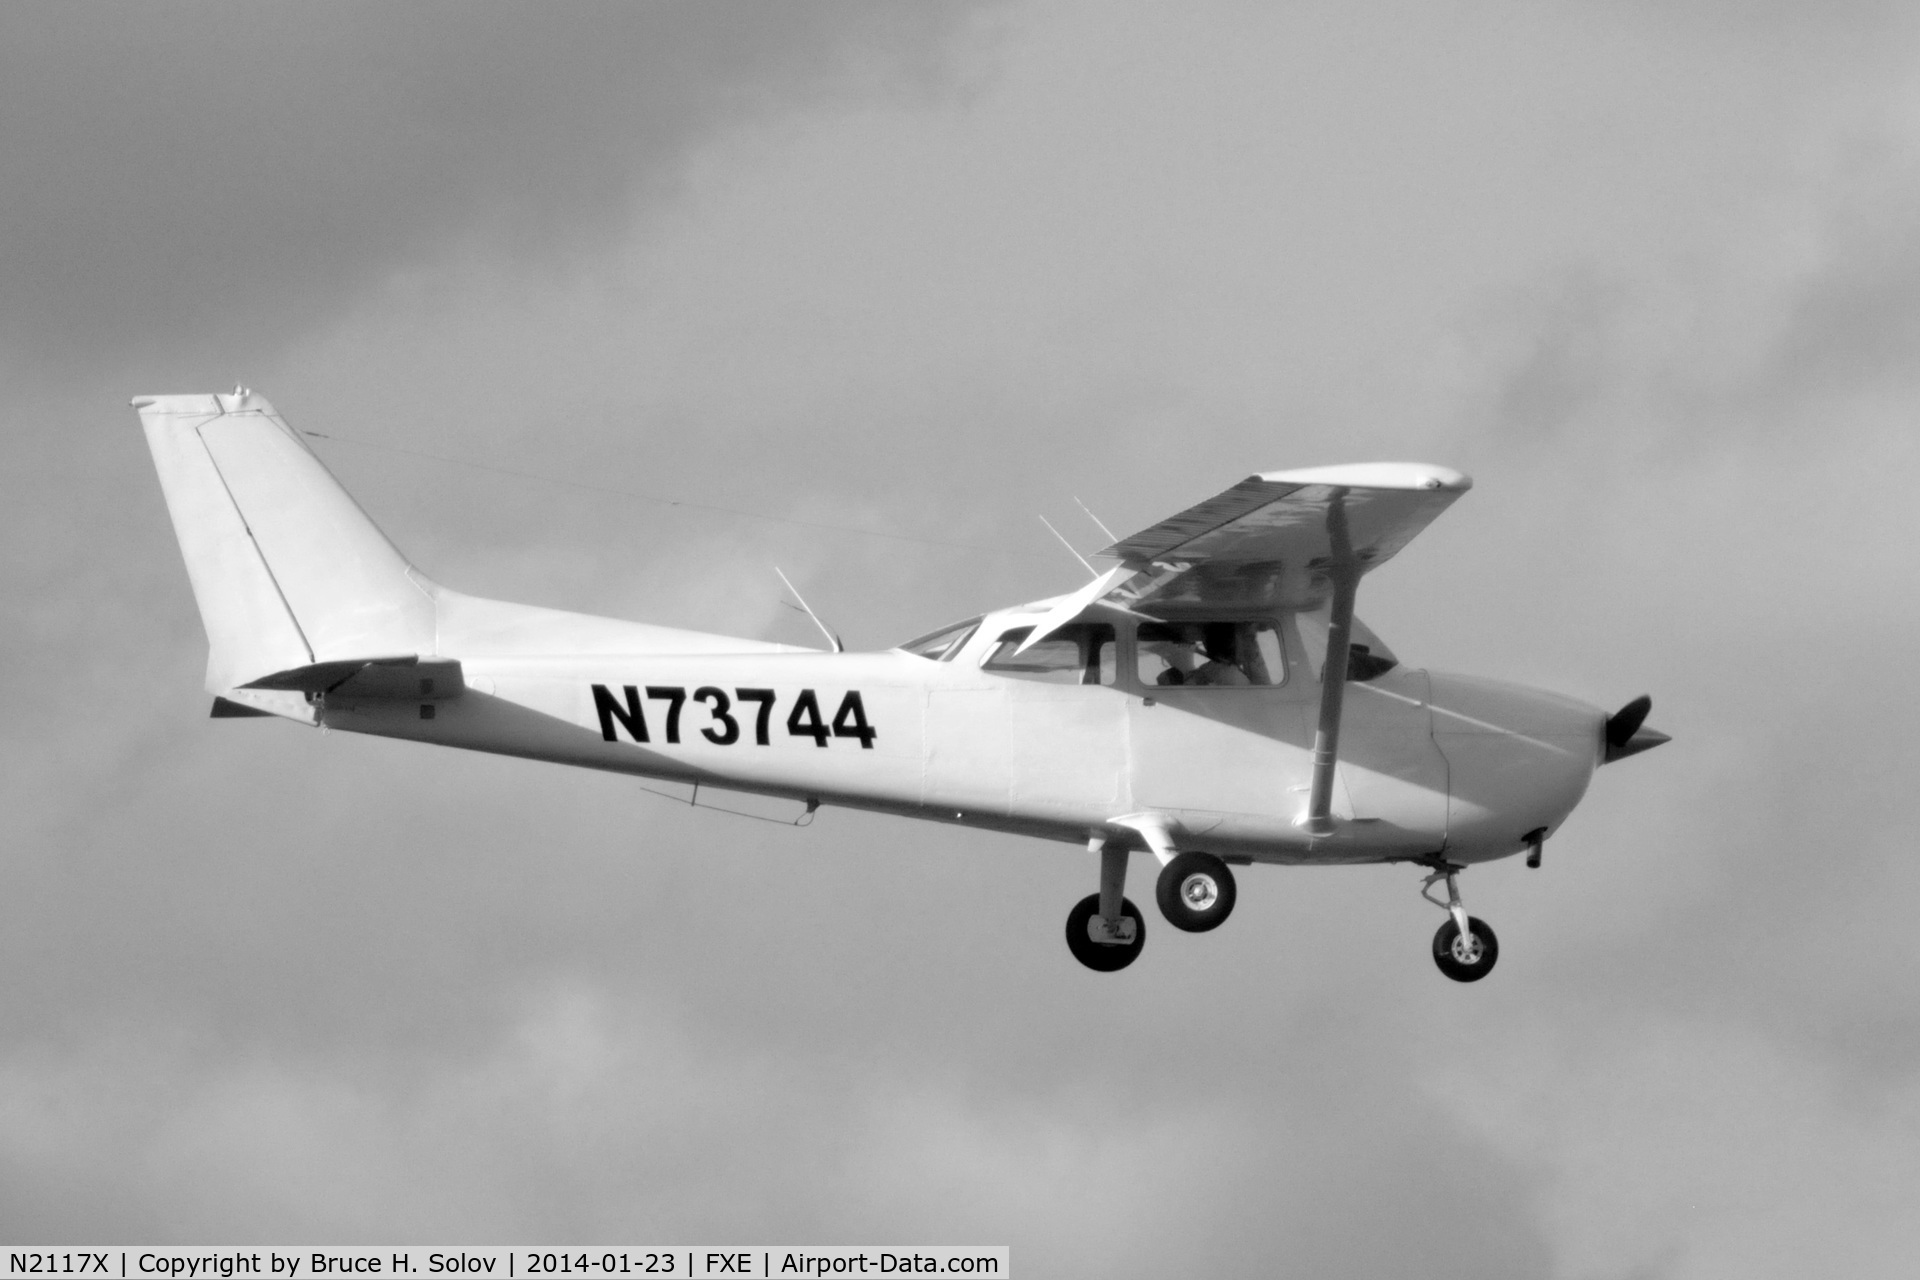 N2117X, 2006 Cessna 172S C/N 172S10423, On final approach to runway 8